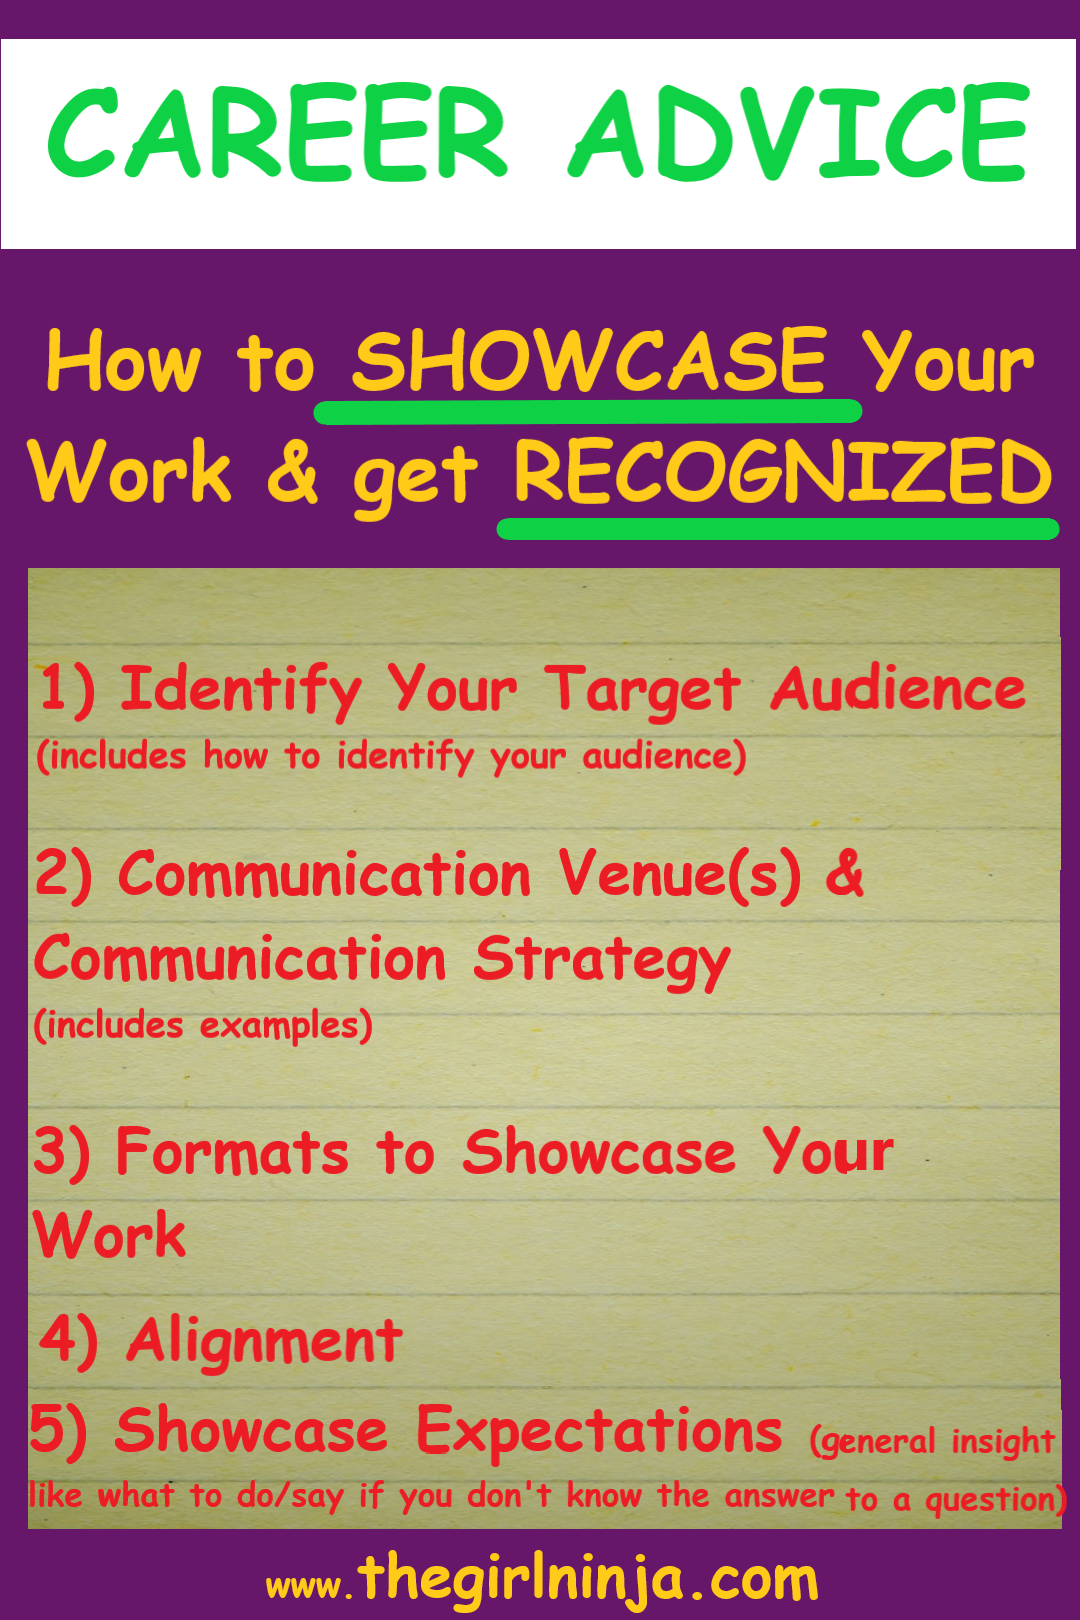 purple rectangle with green text across the top that reads CAREER ADVICE. Yellow text reads How to SHOWCASE Your Work & Get RECOGNIZED. Then on a yellow lined notebook paper red text reads 1) Identify your target audience, 2) Communication, 3) Formats, 4) Alignment, 5) Showcase Expectations. At bottom center yellow text reads www.thegirlninja.com